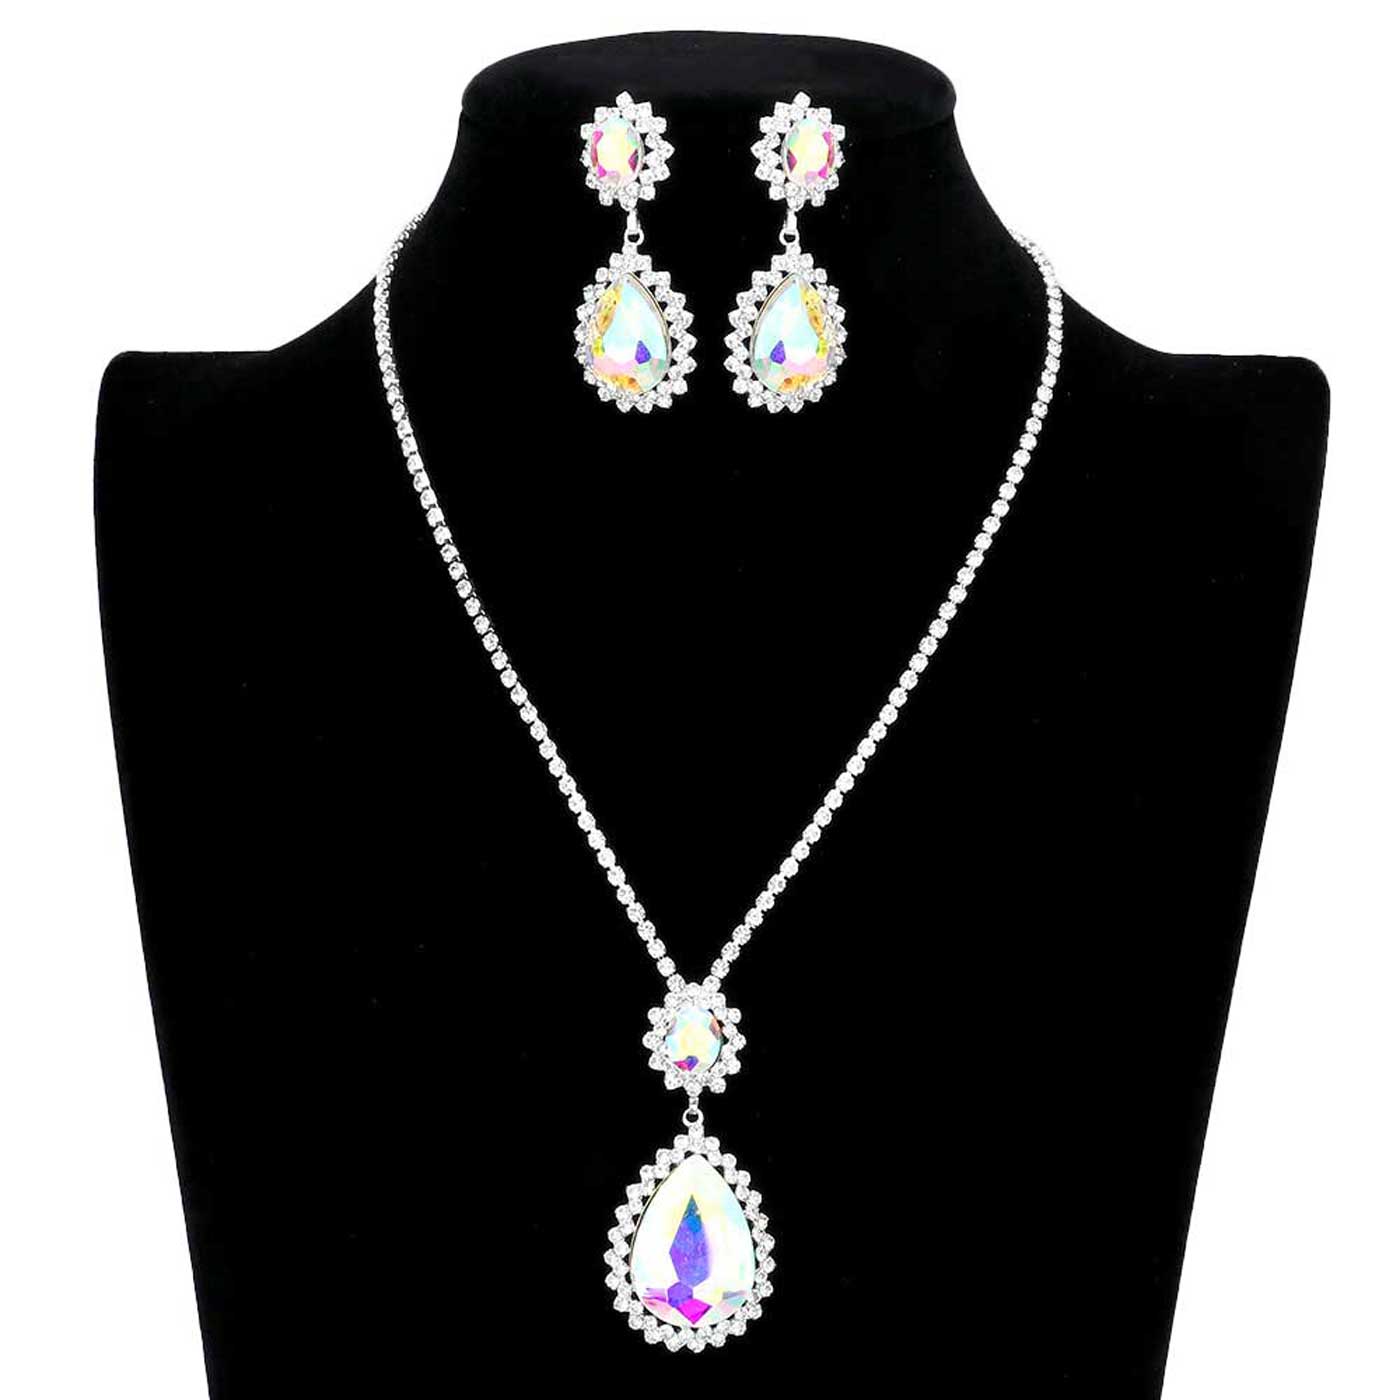 AB Silver Teardrop Accented Rhinestone Necklace. These gorgeous rhinestone pieces will show your class in any special occasion. The elegance of these rhinestone goes unmatched, great for wearing at a party! Perfect jewelry to enhance your look. Awesome gift for birthday, Anniversary, Valentine’s Day or any special occasion.